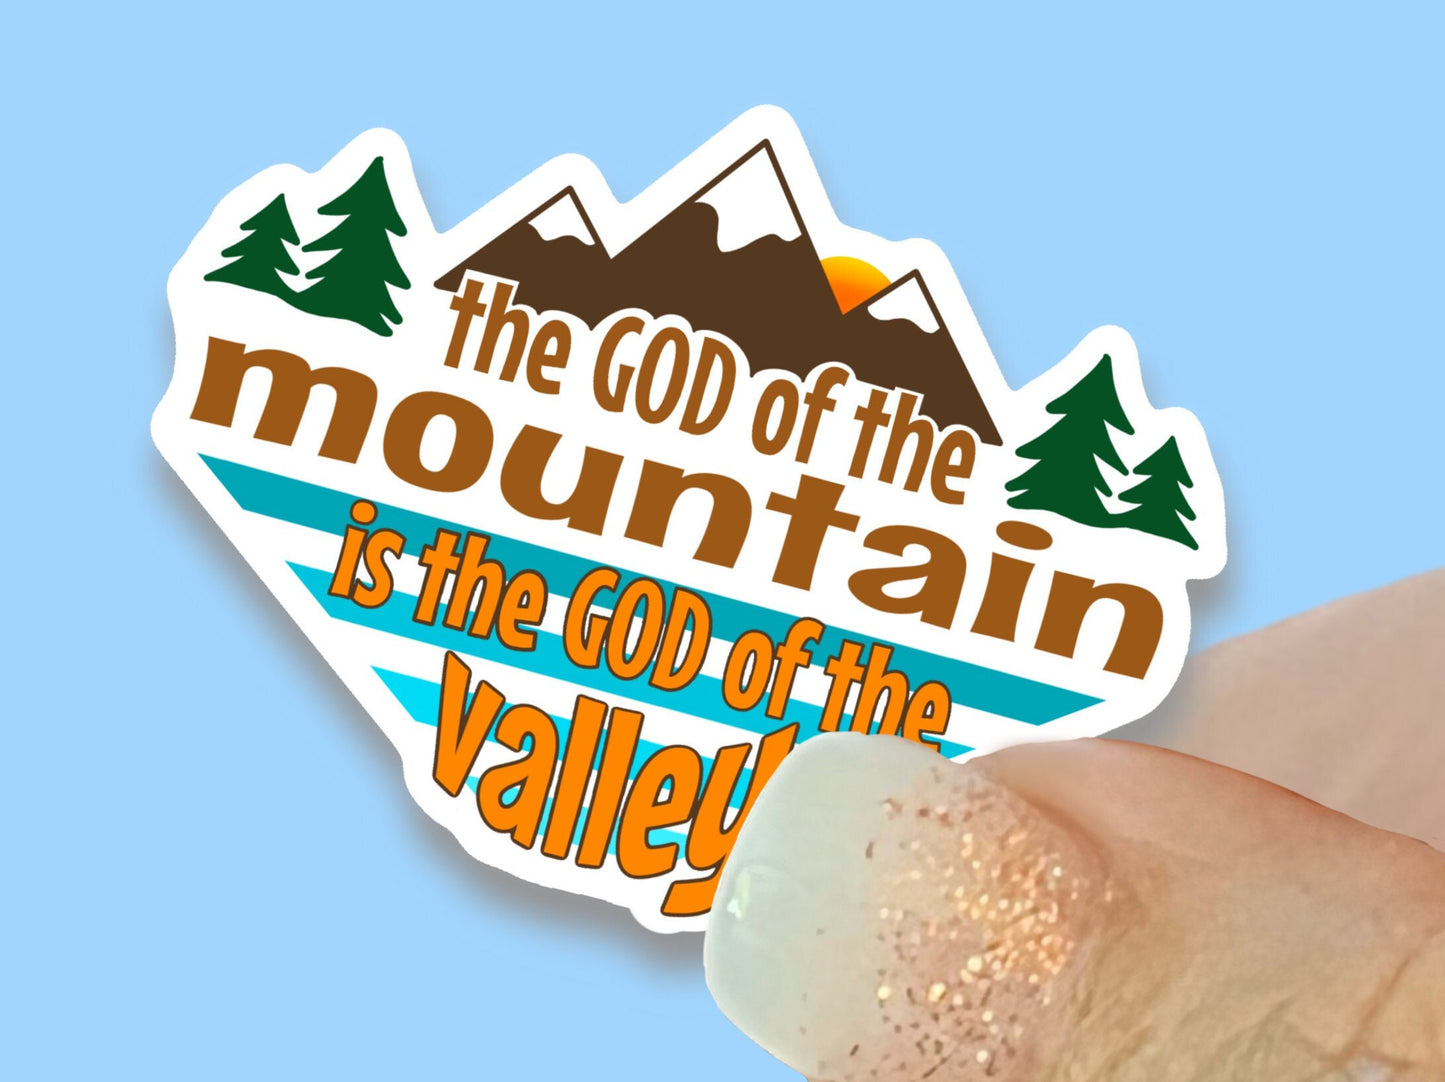 The God of the Mountain is the God of the Valley Christian Faith UV/ Waterproof Vinyl Sticker/ Decal- Choice of Size, Single or Bulk qty